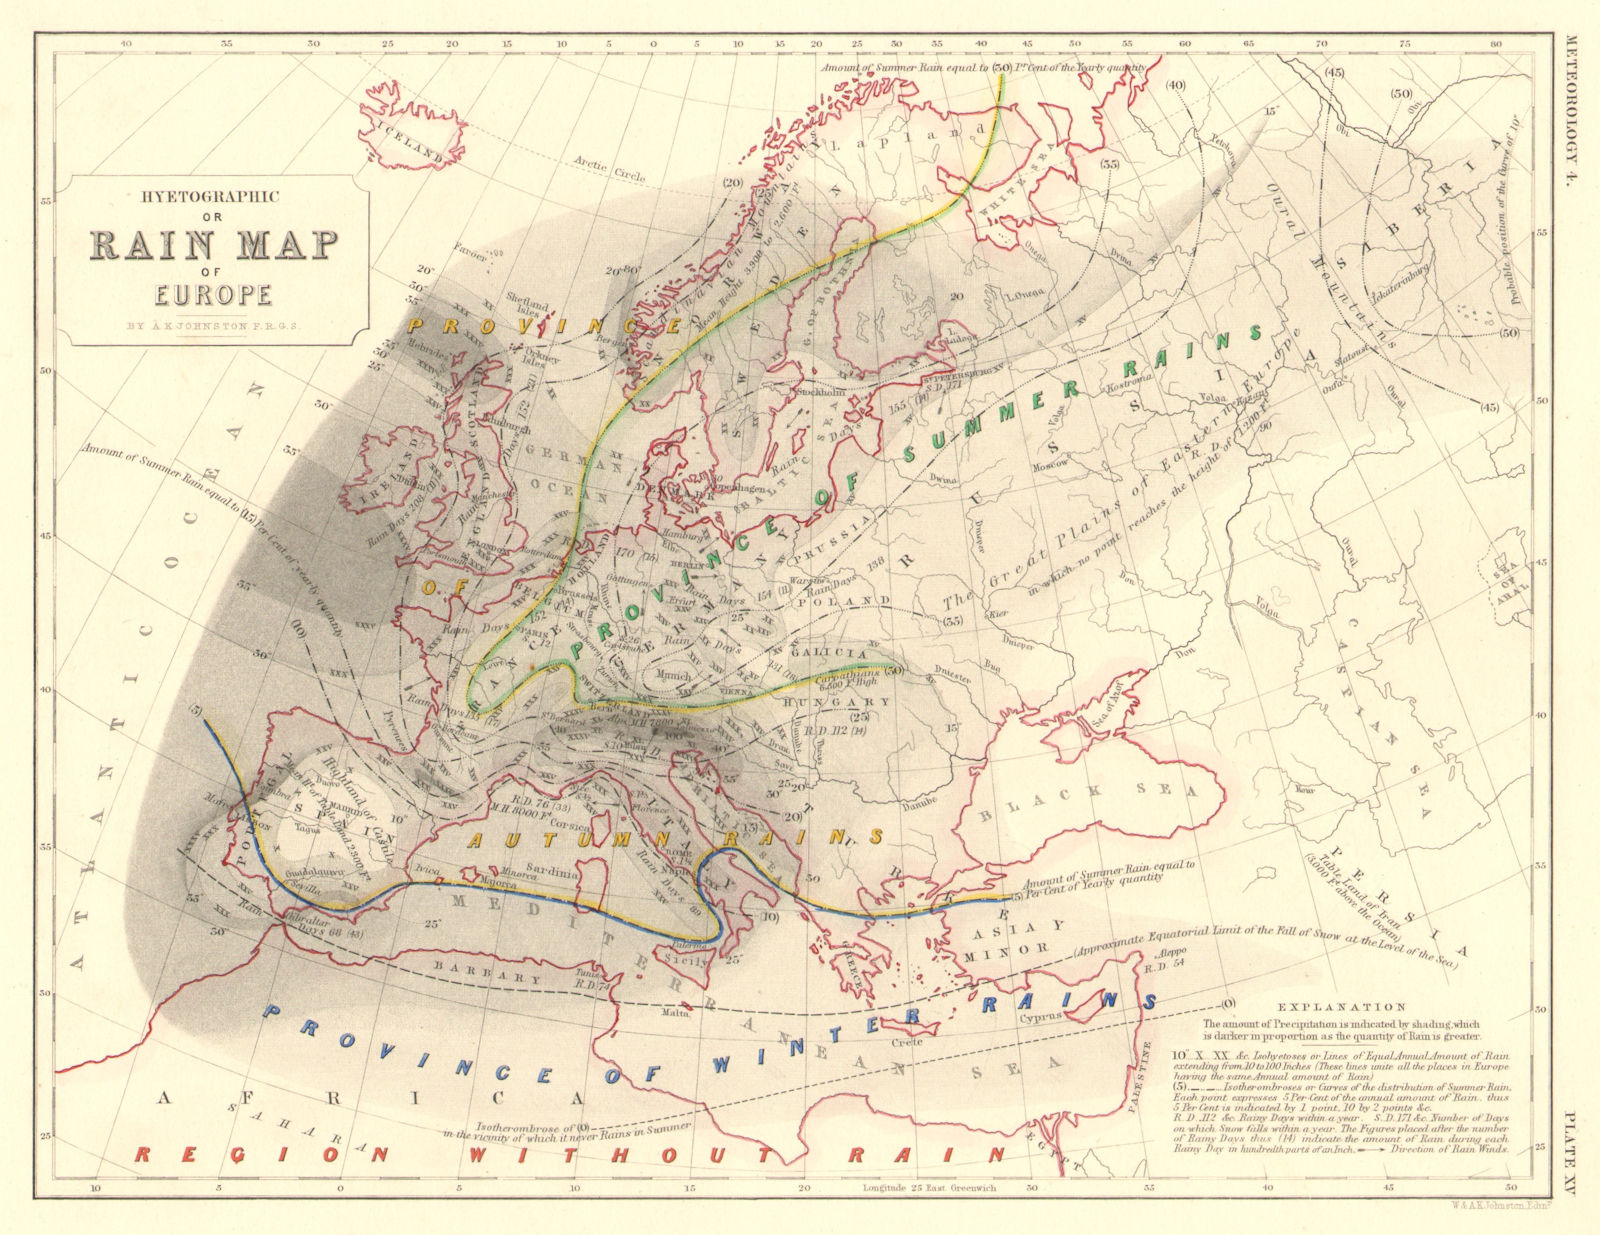 EUROPE. Hyetographic or rain map of Europe 1850 old antique plan chart